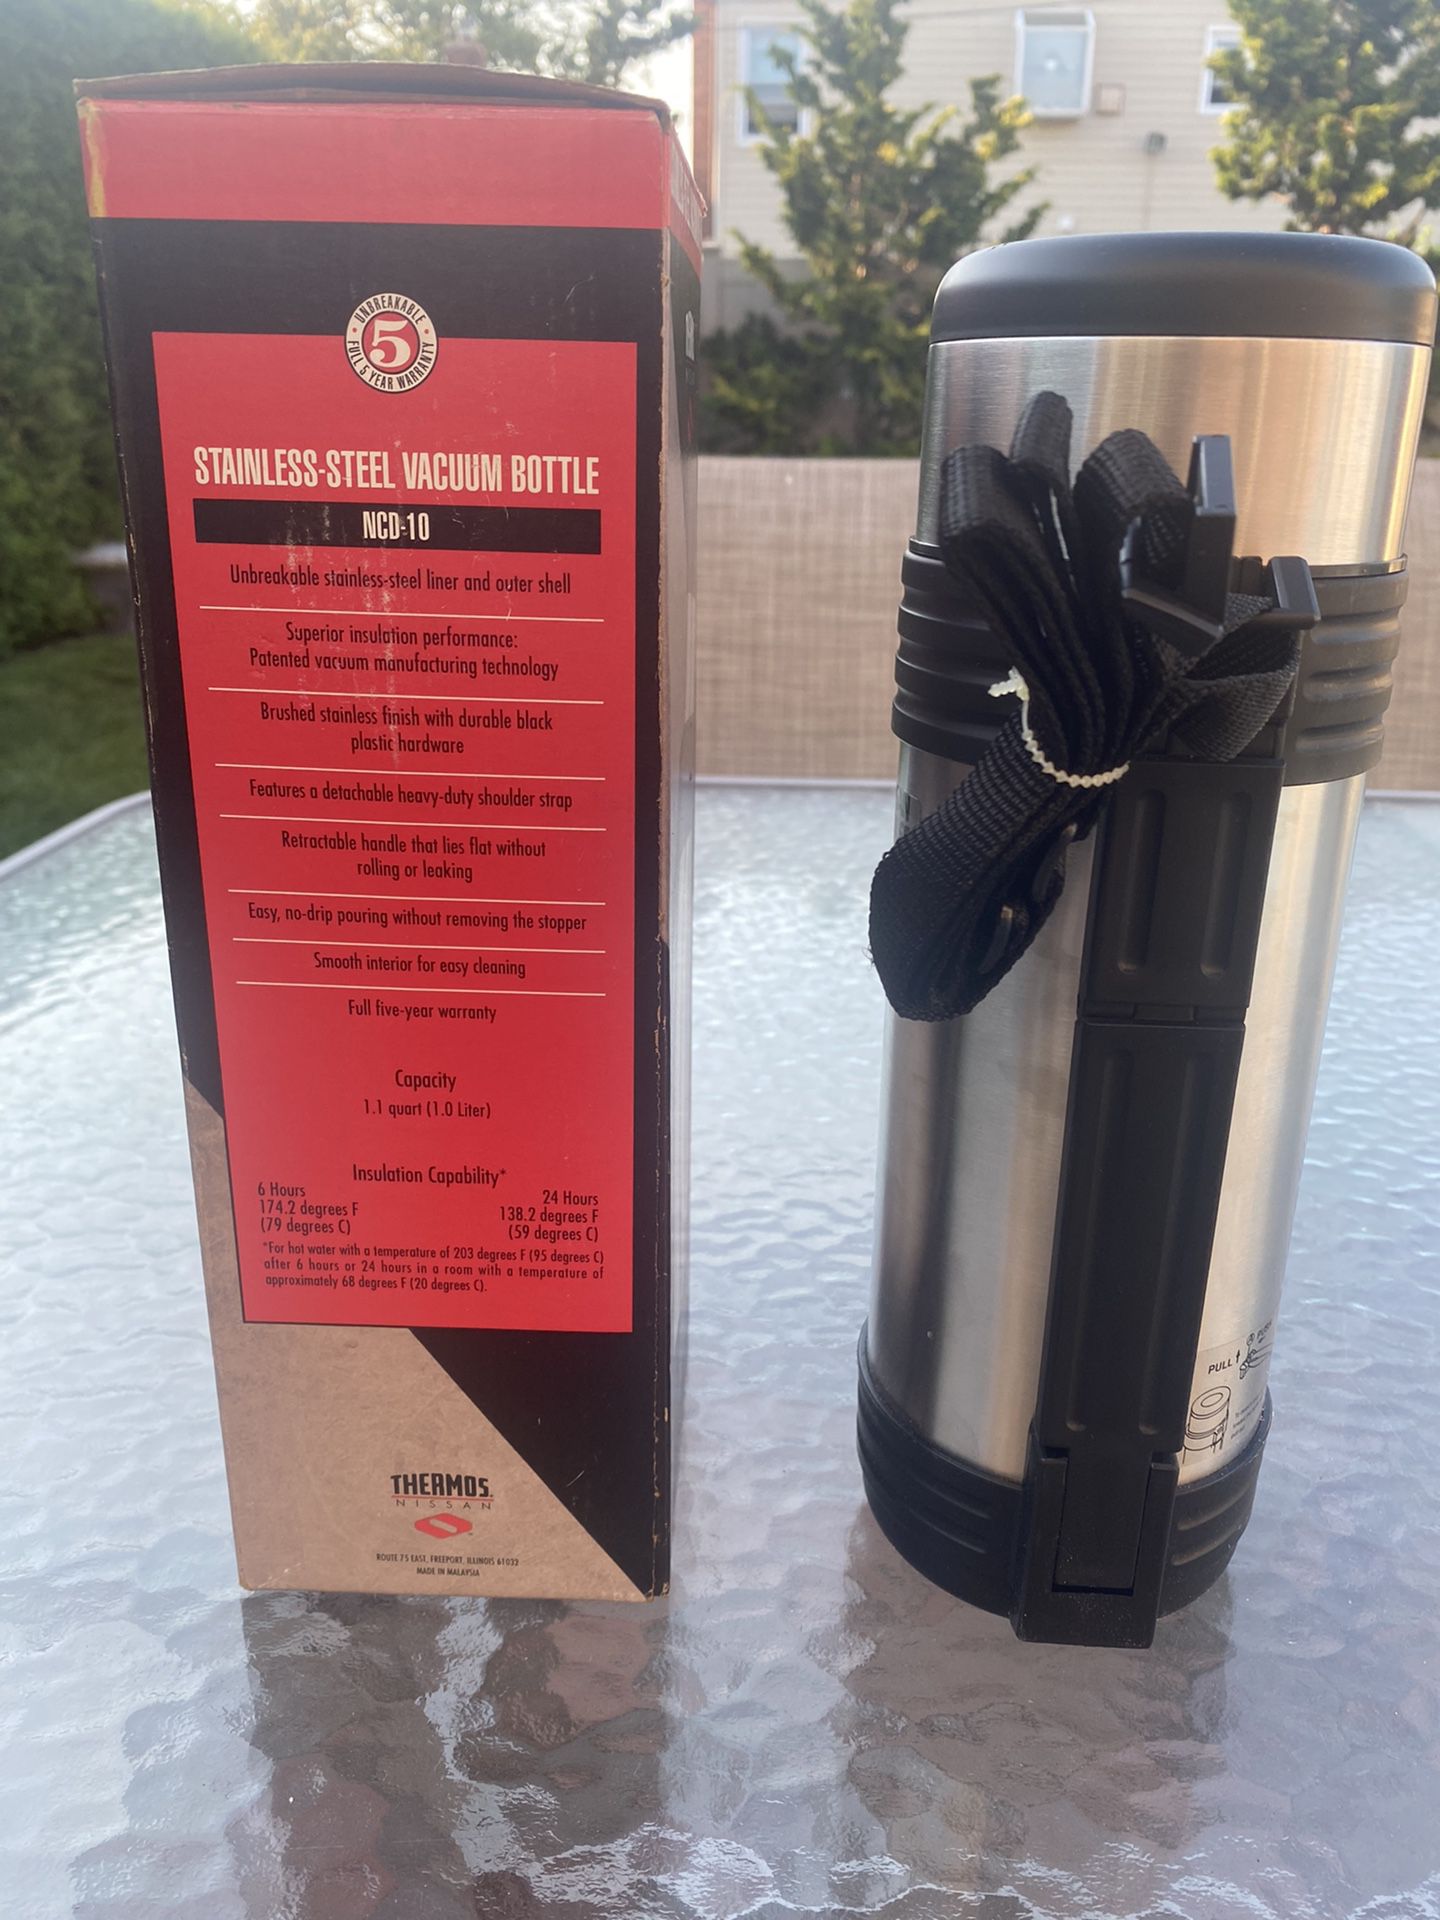 STANLEY STAINLESS STEEL THERMOS 1.1 QUART VACUUM Big USA 1 Liter for Sale  in Phoenix, AZ - OfferUp